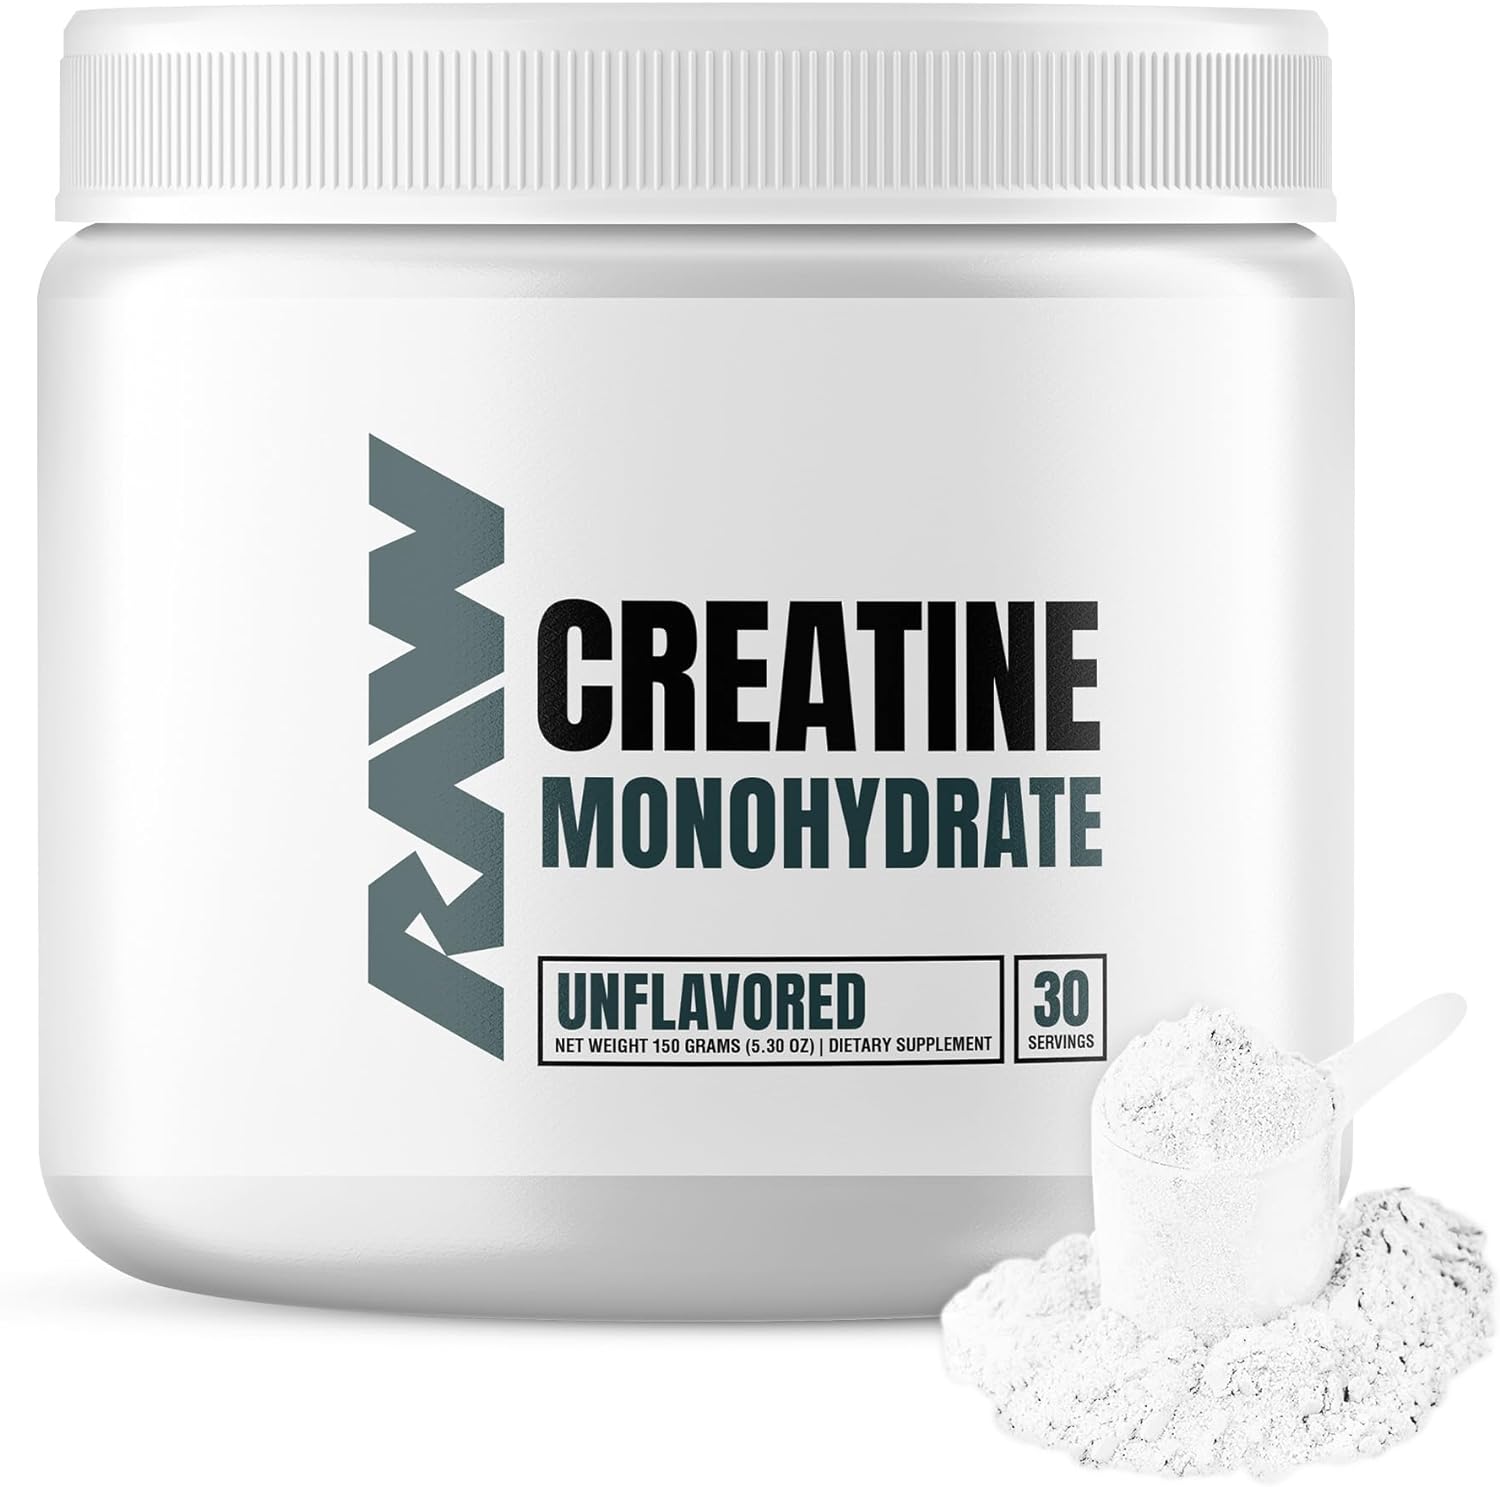 RAW Nutrition Creatine Monohydrate Powder, Unflavored (30 Servings) - Micronized Creatine Monohydrate Supplement for Workout Performance, Build Muscle & Strength - Creatine Powder for Men & Women